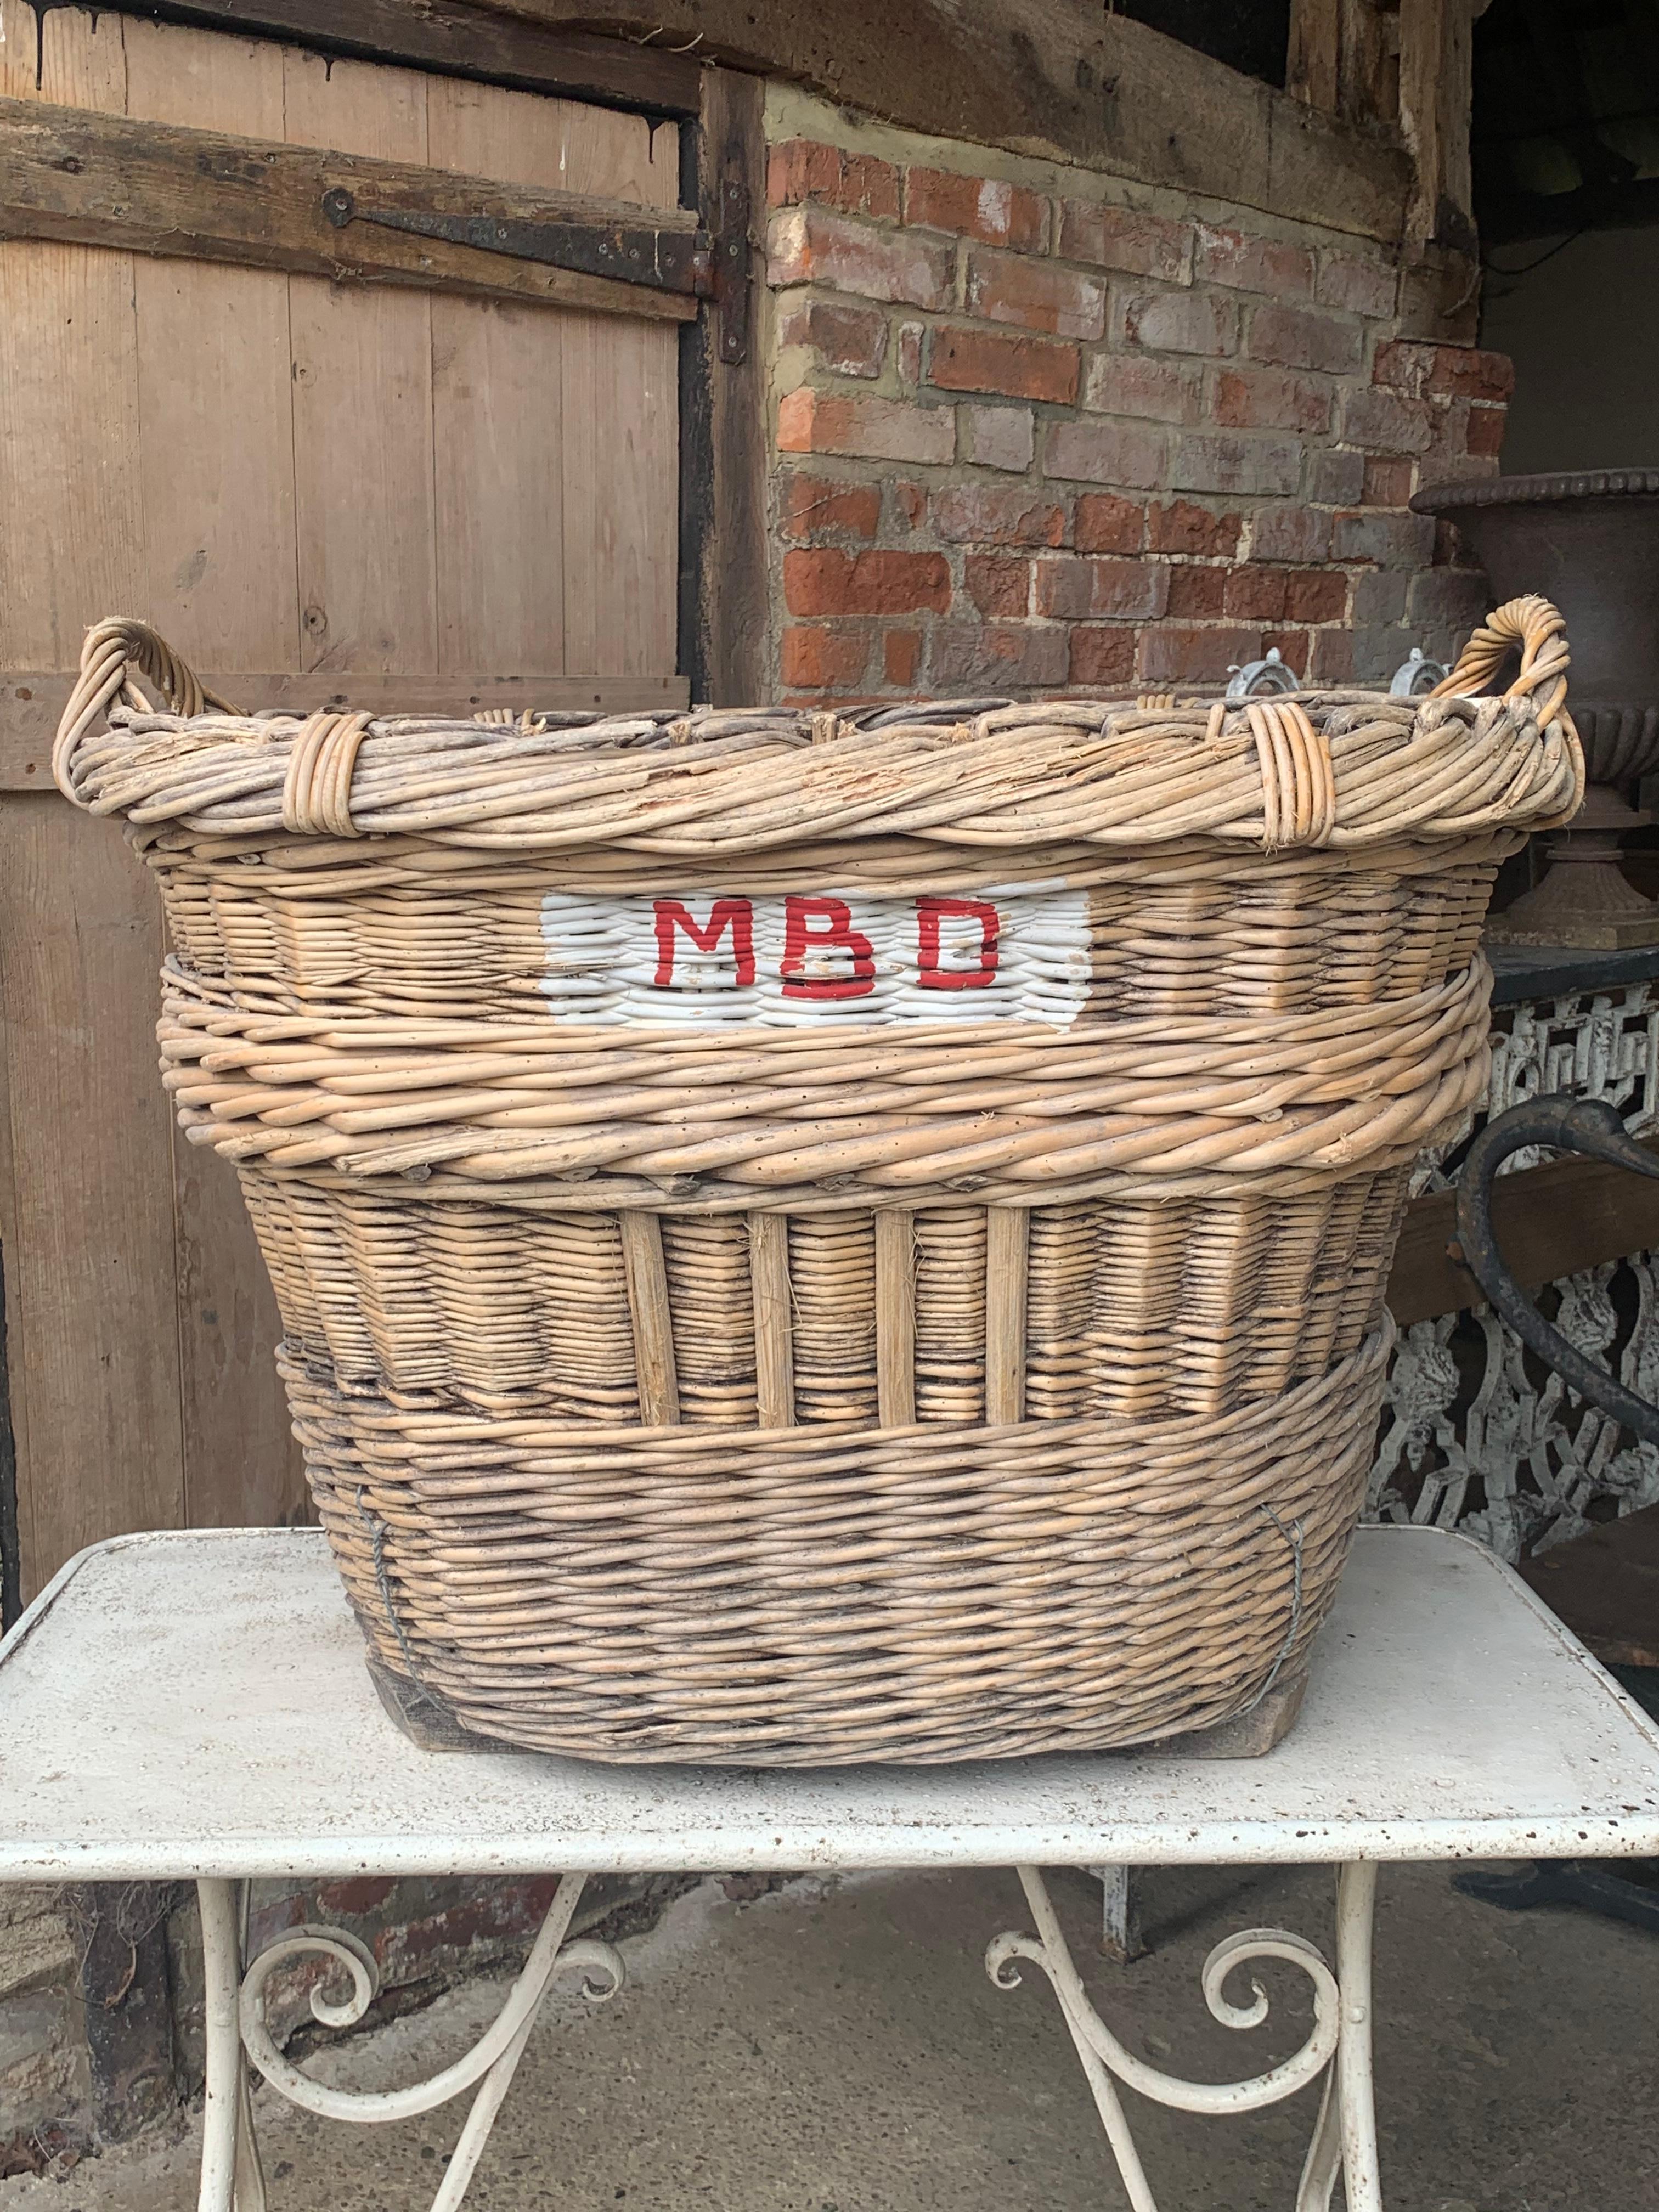 A nice large early 20th century French Champagne grape harvesting basket with the painted markings of the vineyard owner. These were used to harvest the grapes in the vineyards but now make nice decorative and useful baskets.

In good solid